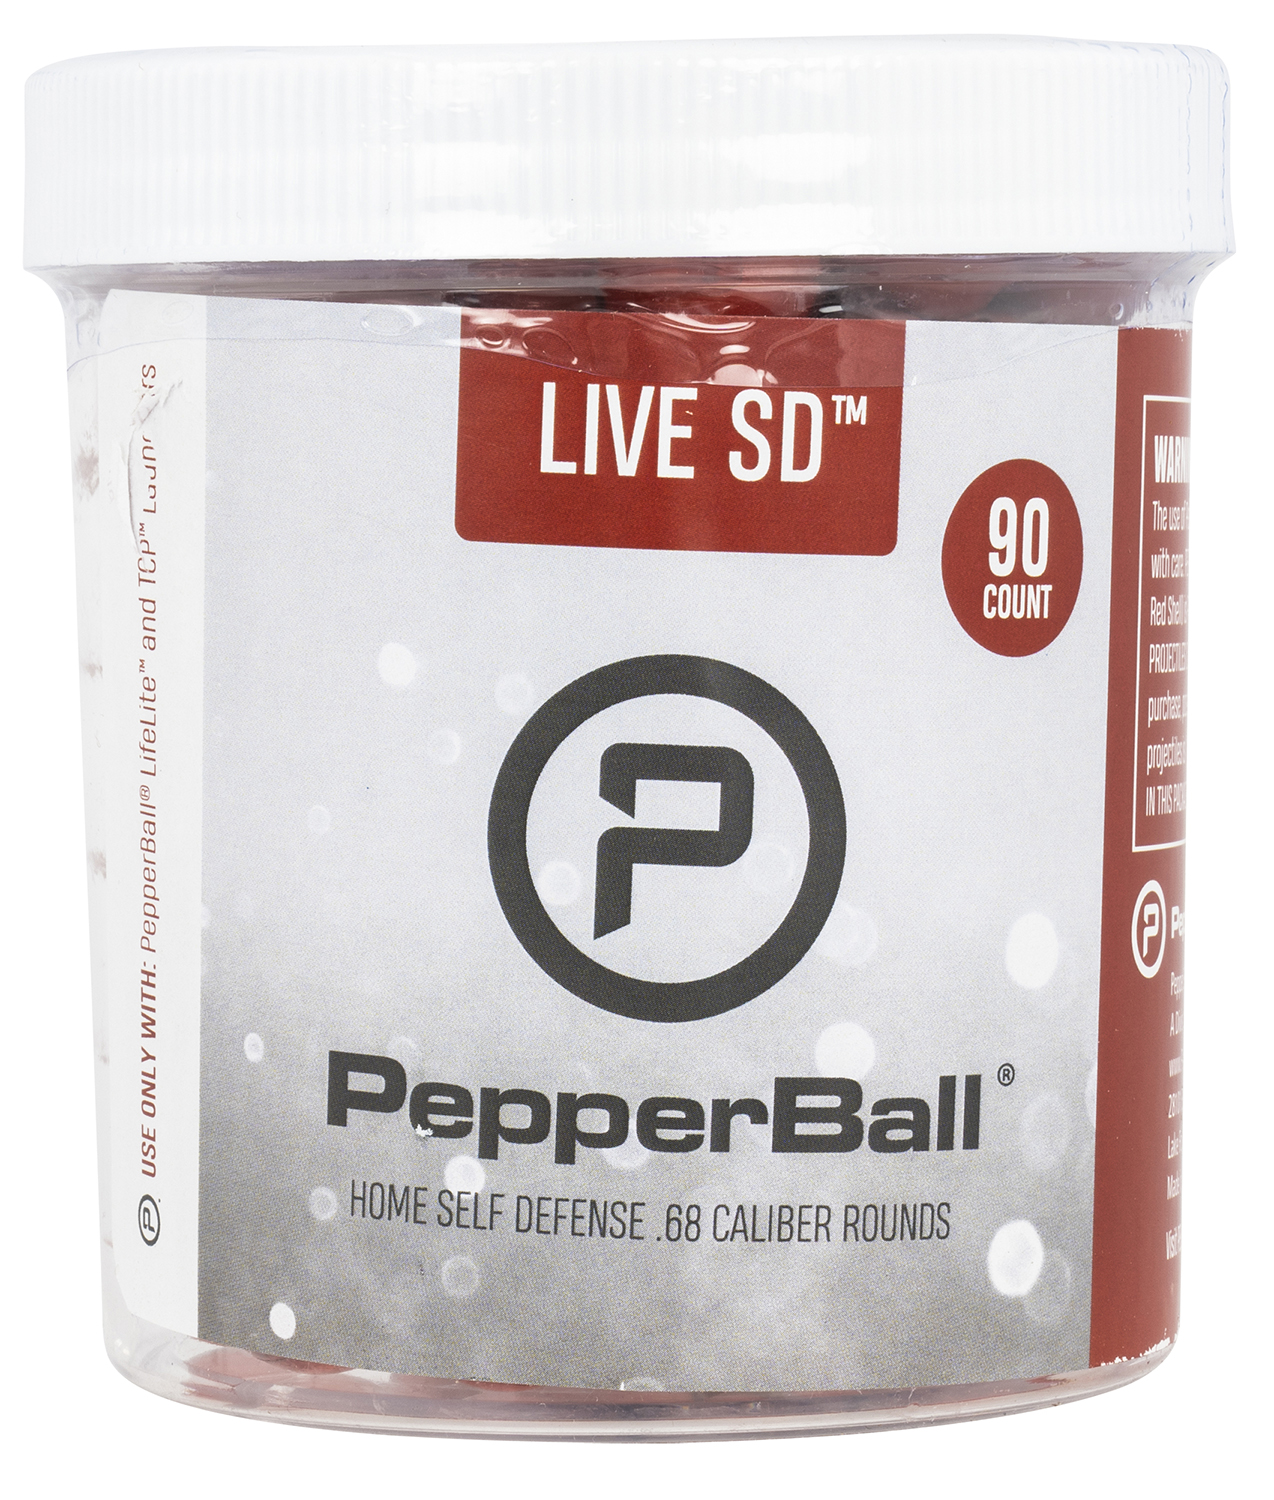 PEPPERBALL LIVE SD 90CT